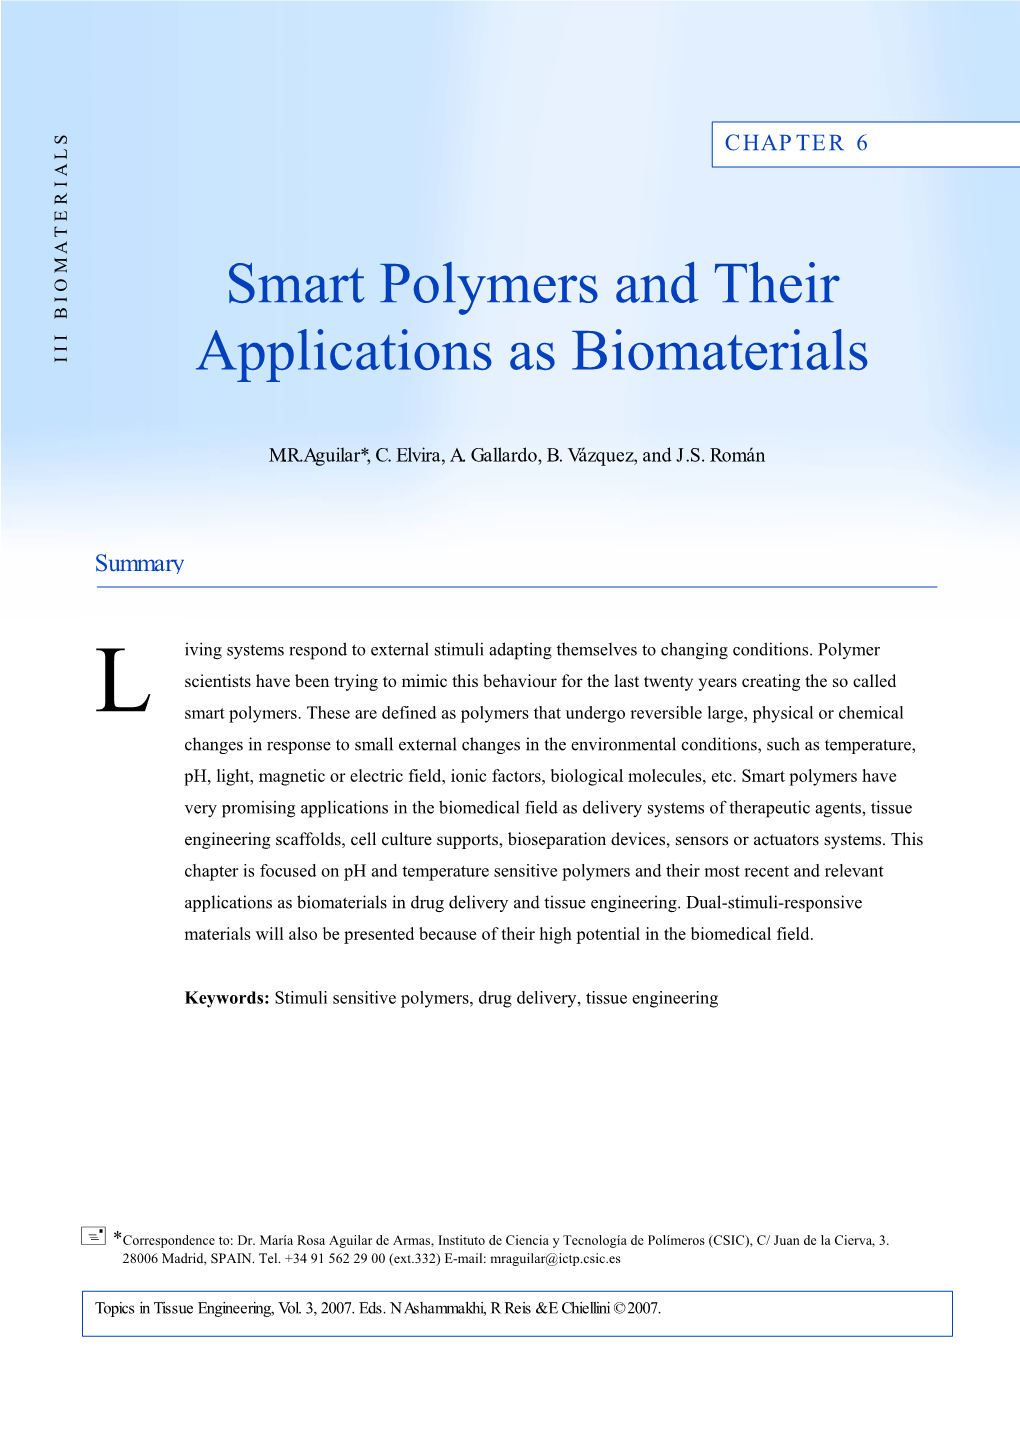 Smart Polymers and Their Applications As Biomaterials